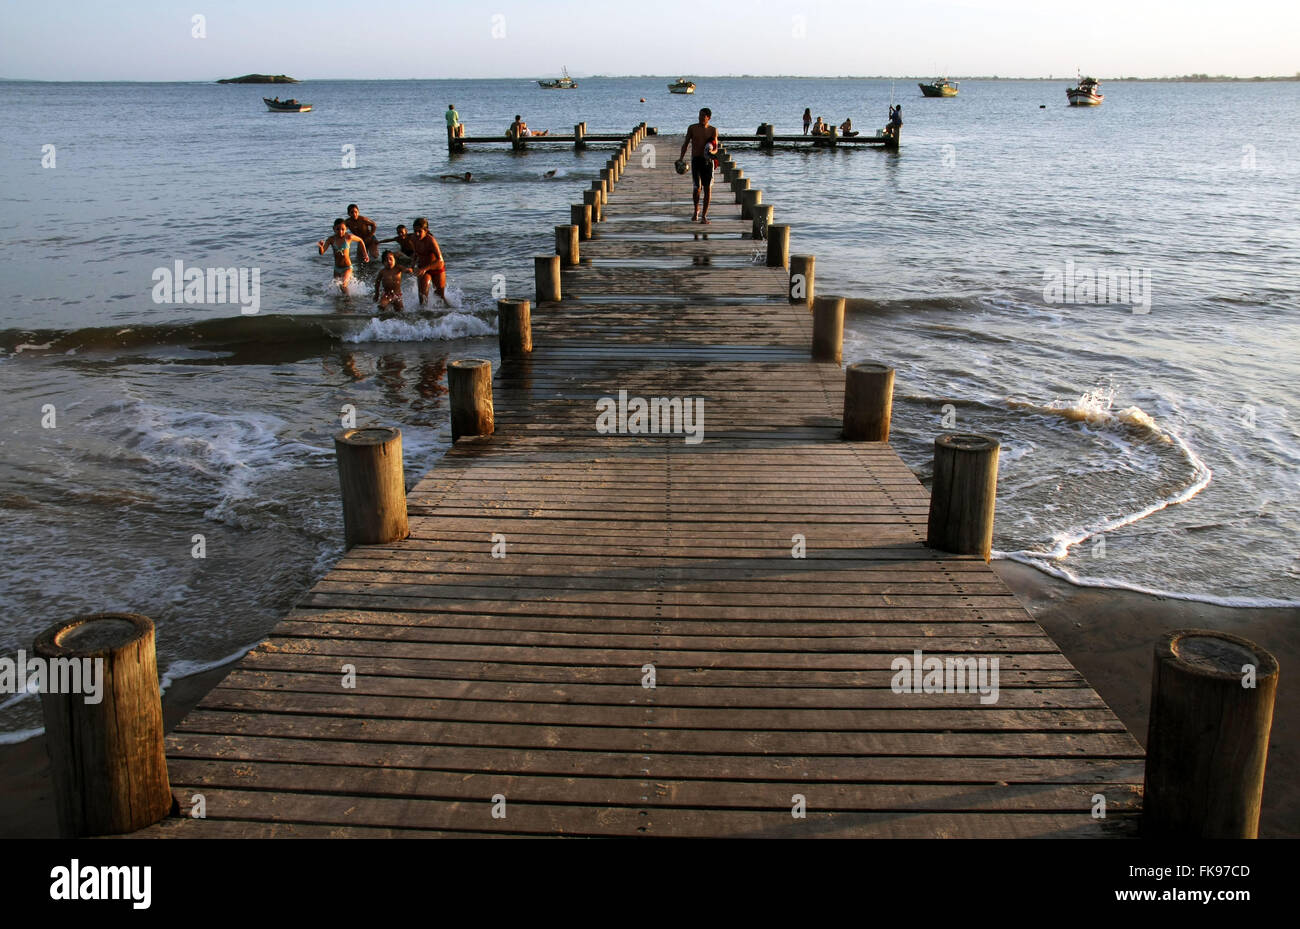 Chico Beach Pier Fields in the Mouth of the River Oyster Bar - RJ Stock Photo